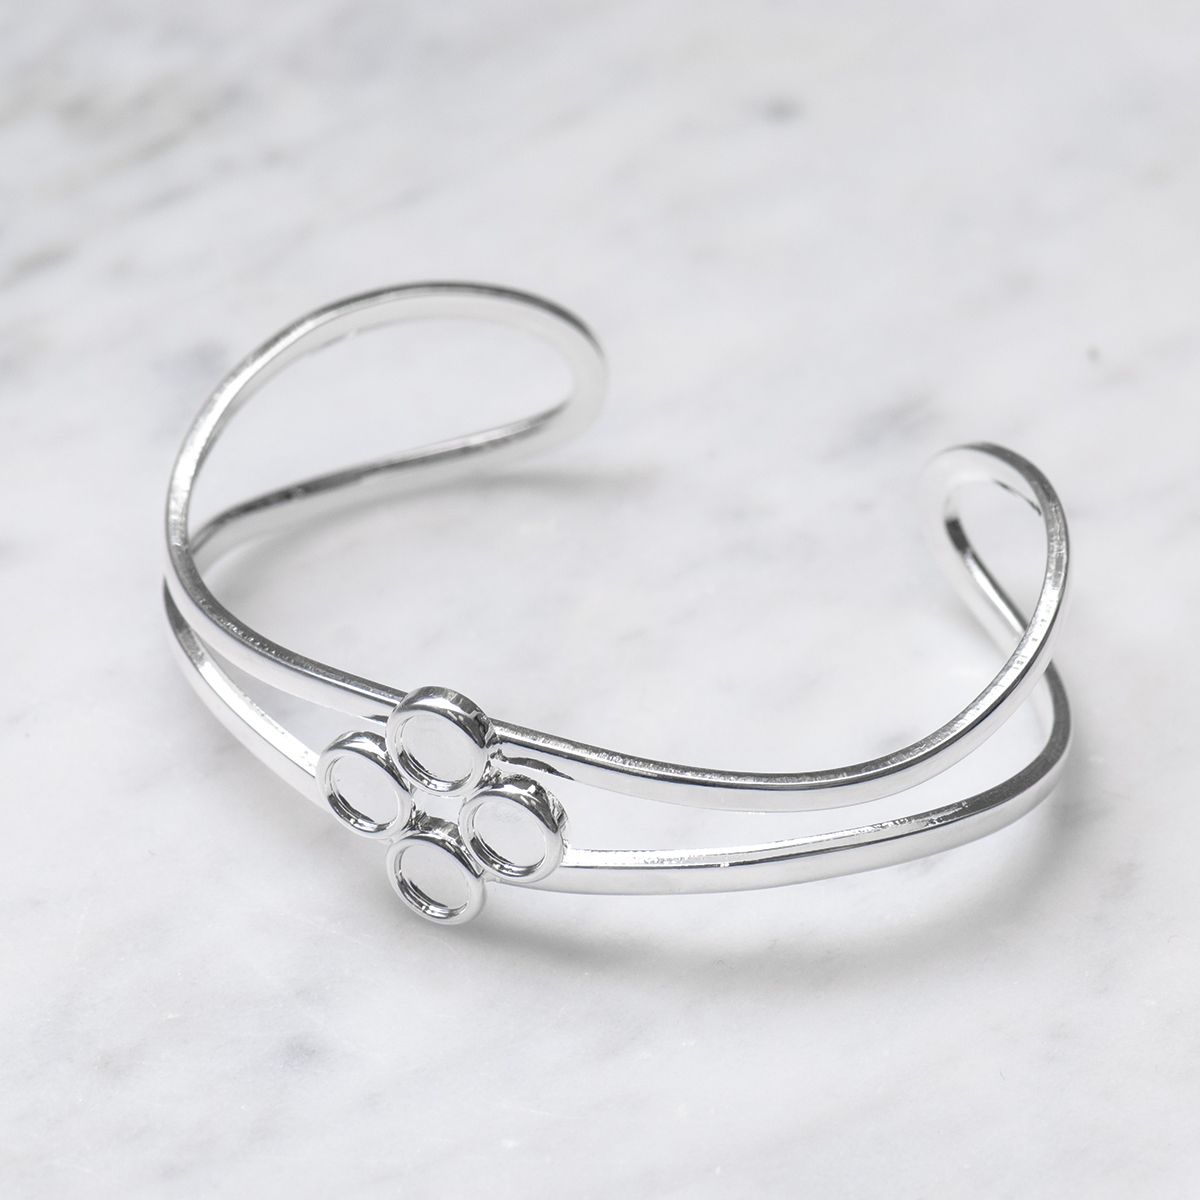 Silver Plated Bangle Setting for 5mm Round Cabochon Stones